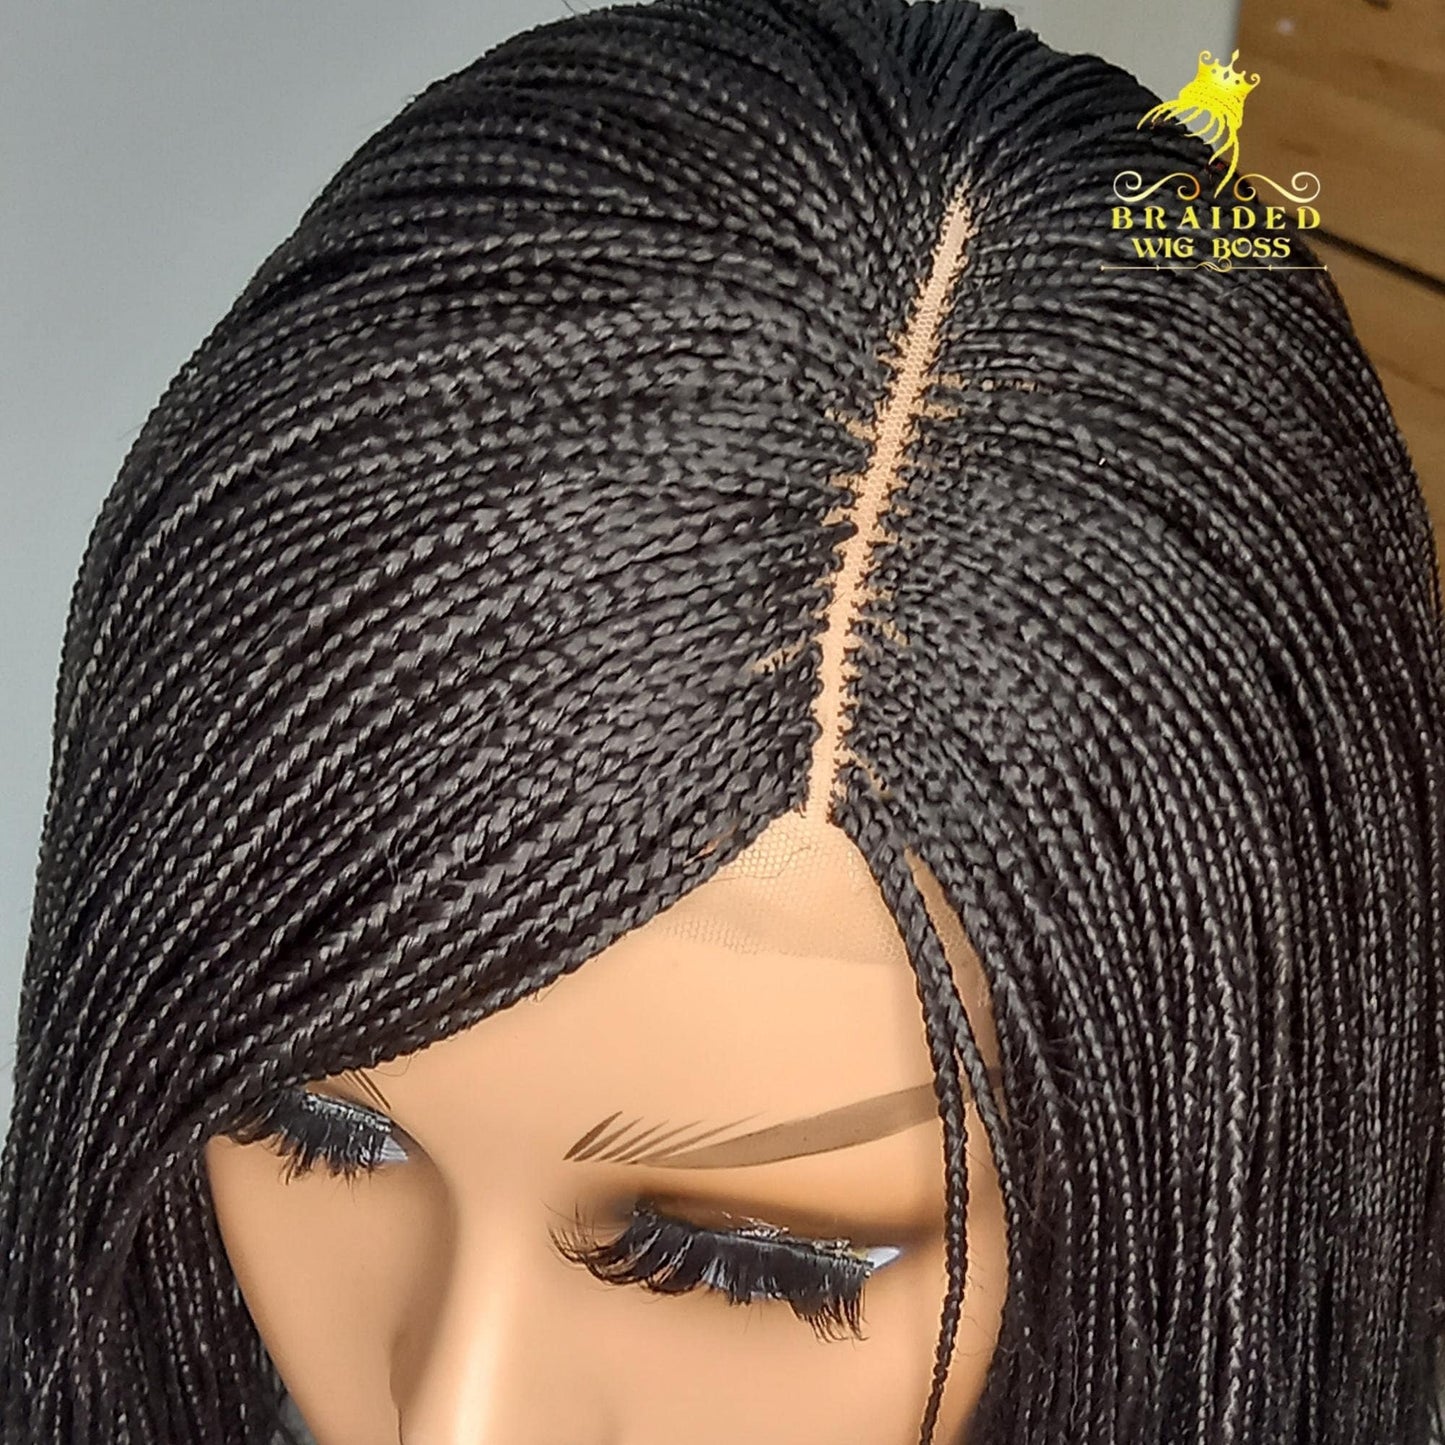 10 Inches Short Micro Braid Wig on 2 By 4 Lace Front Color 2 Without Baby Hairs Glueless Braided Lace Wig for Black Women